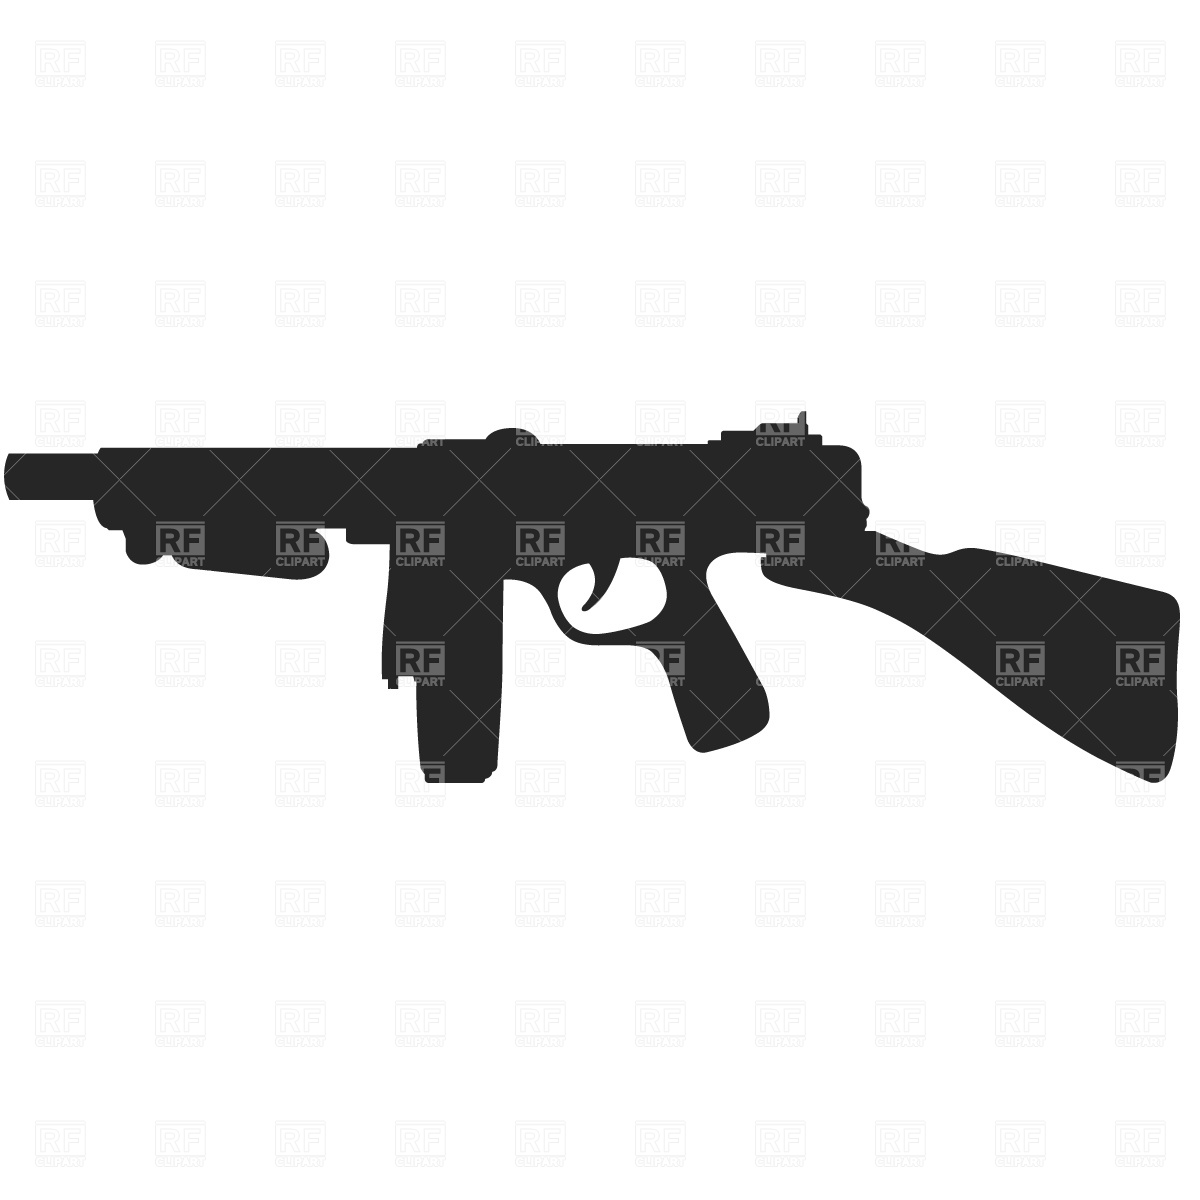 Gangster S Machine Gun Silhouette 633 Objects Download Royalty Free